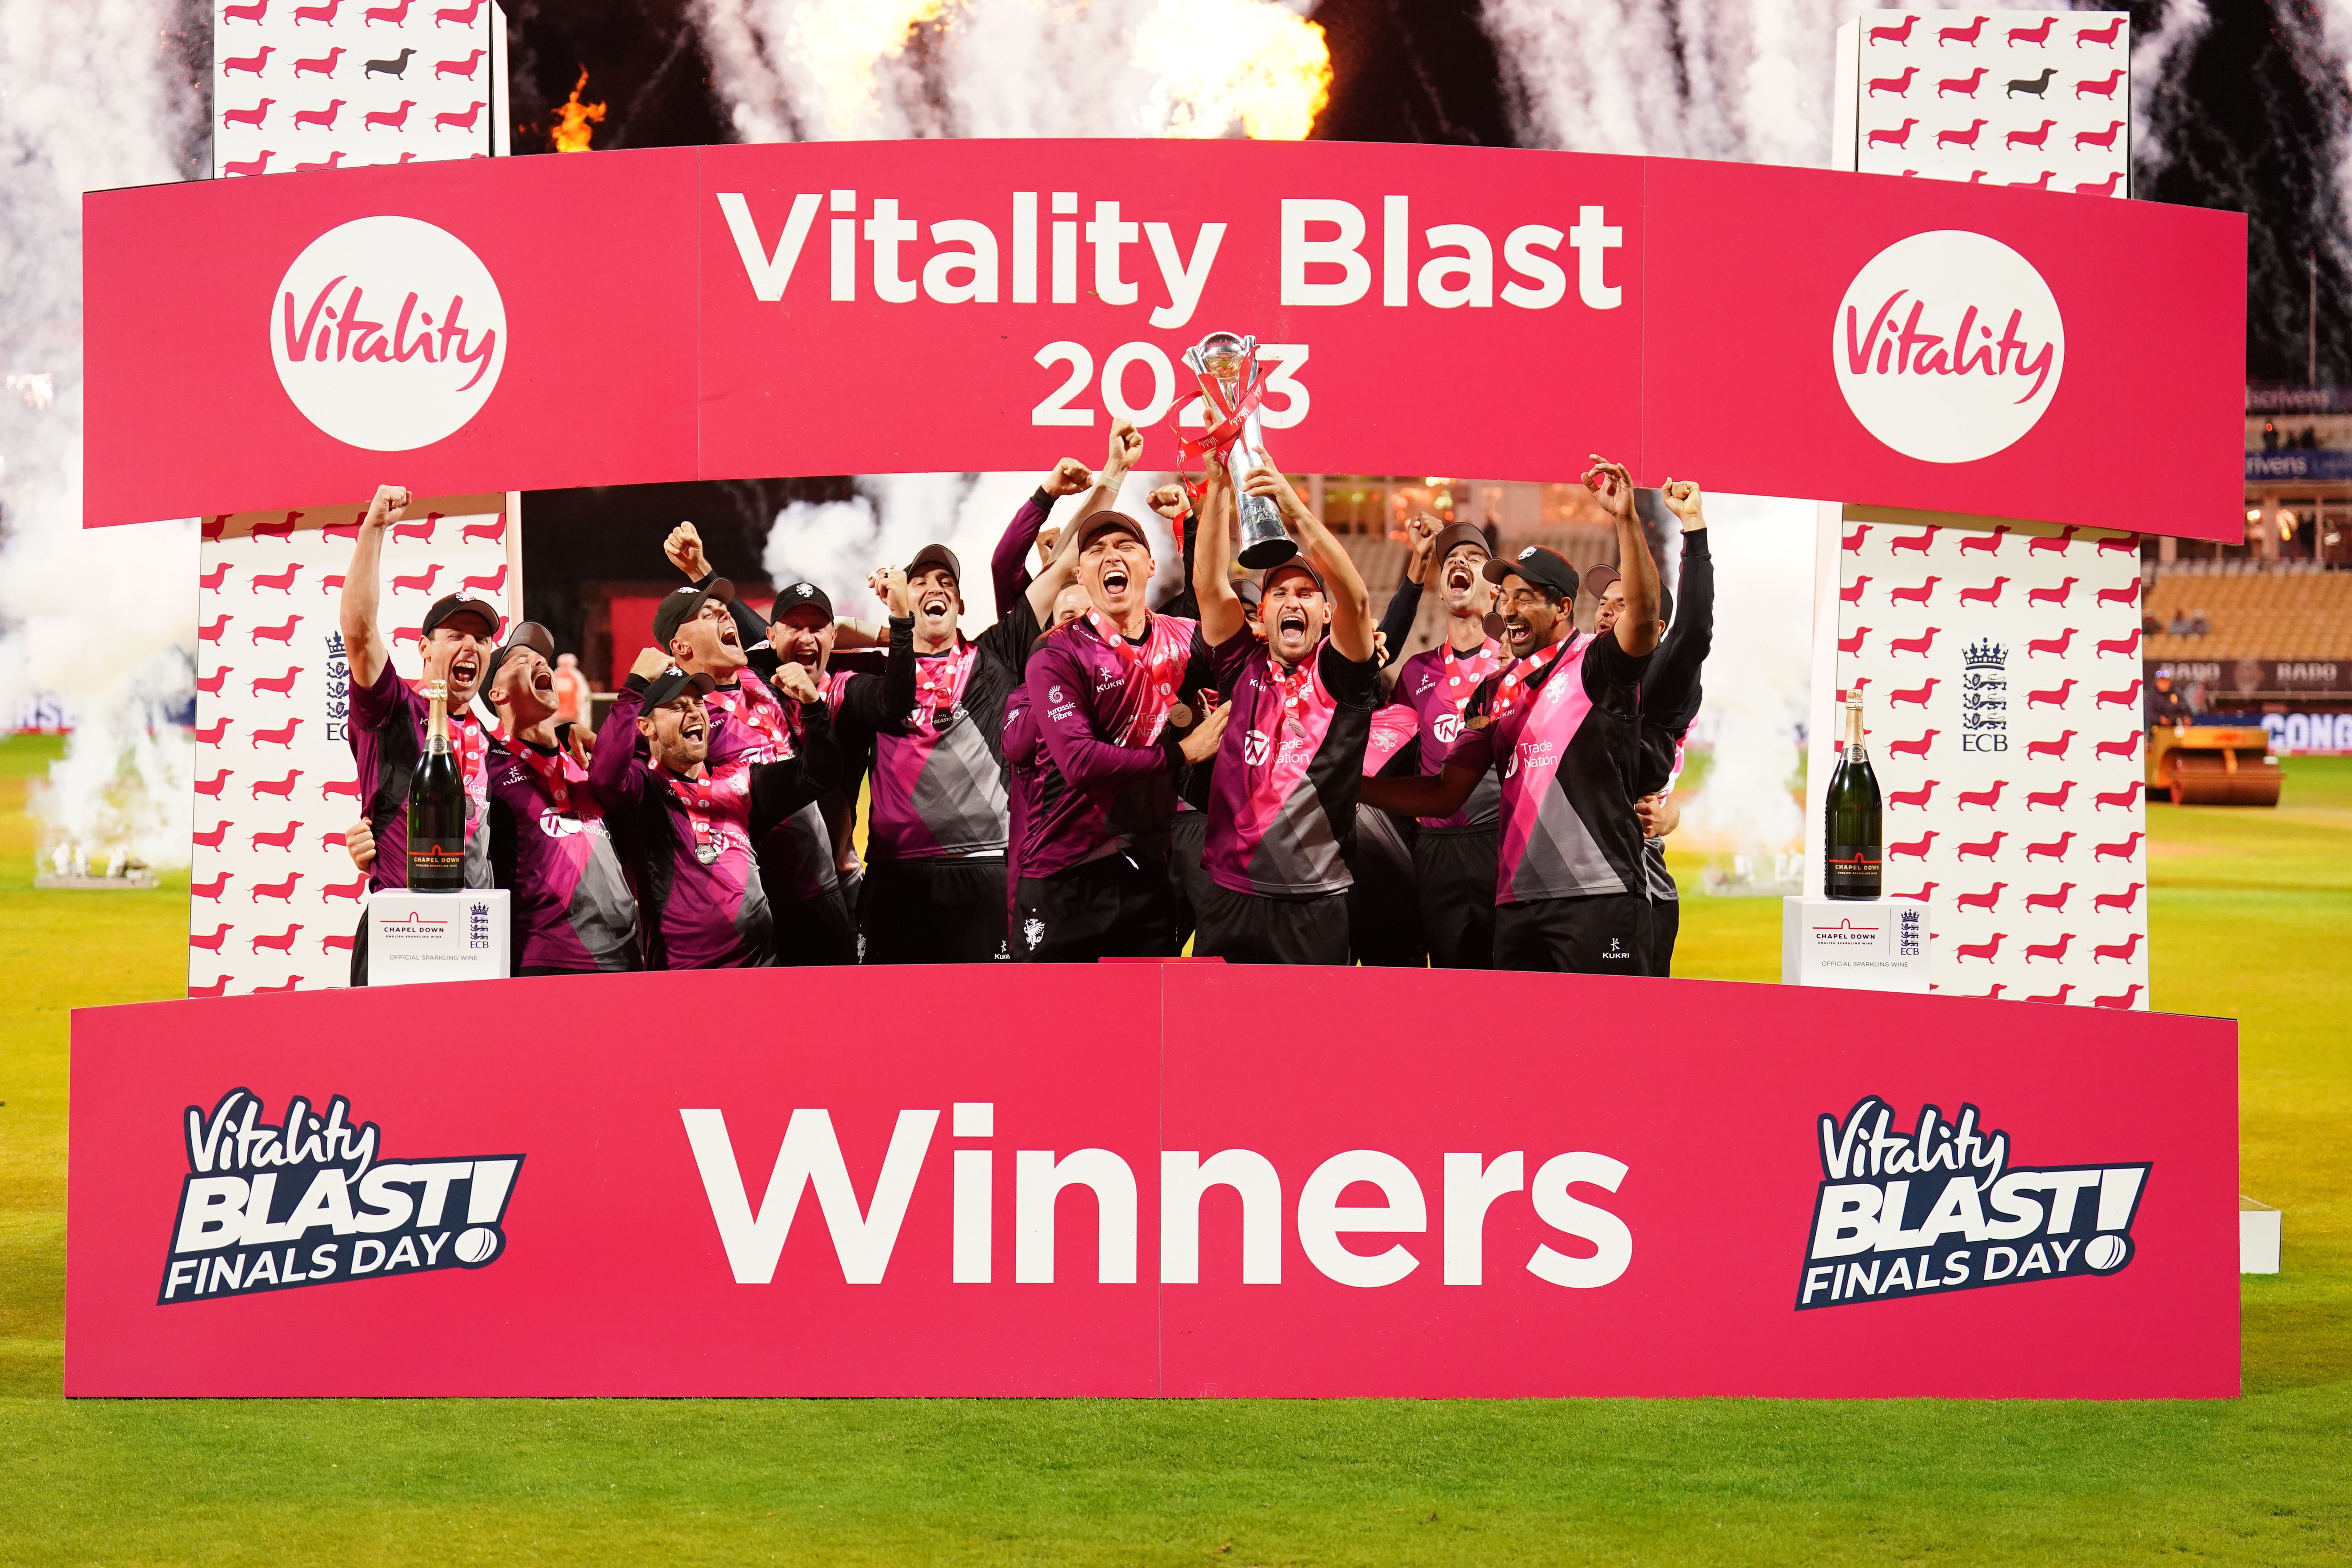 The Vitality Blast kicks off with men’s and women’s double-headers